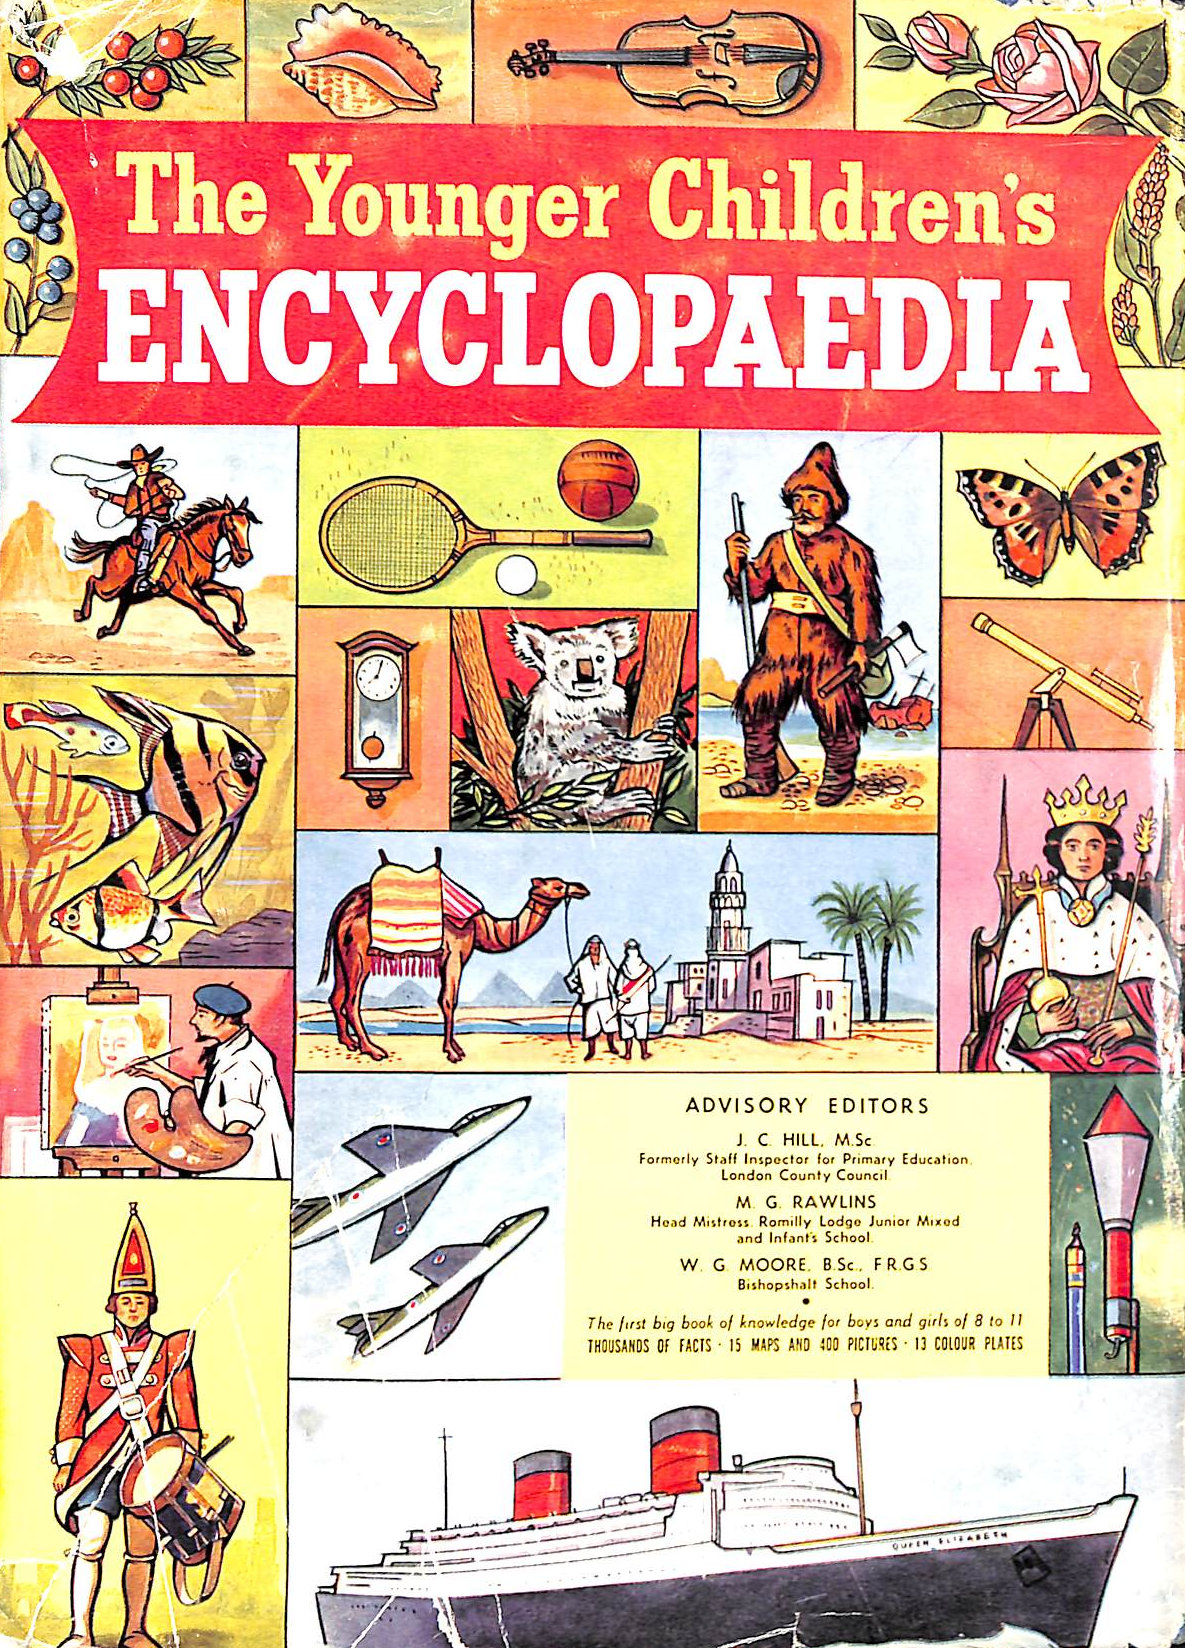 J.C. HILL [EDITOR] - The Younger Children's Encyclopedia